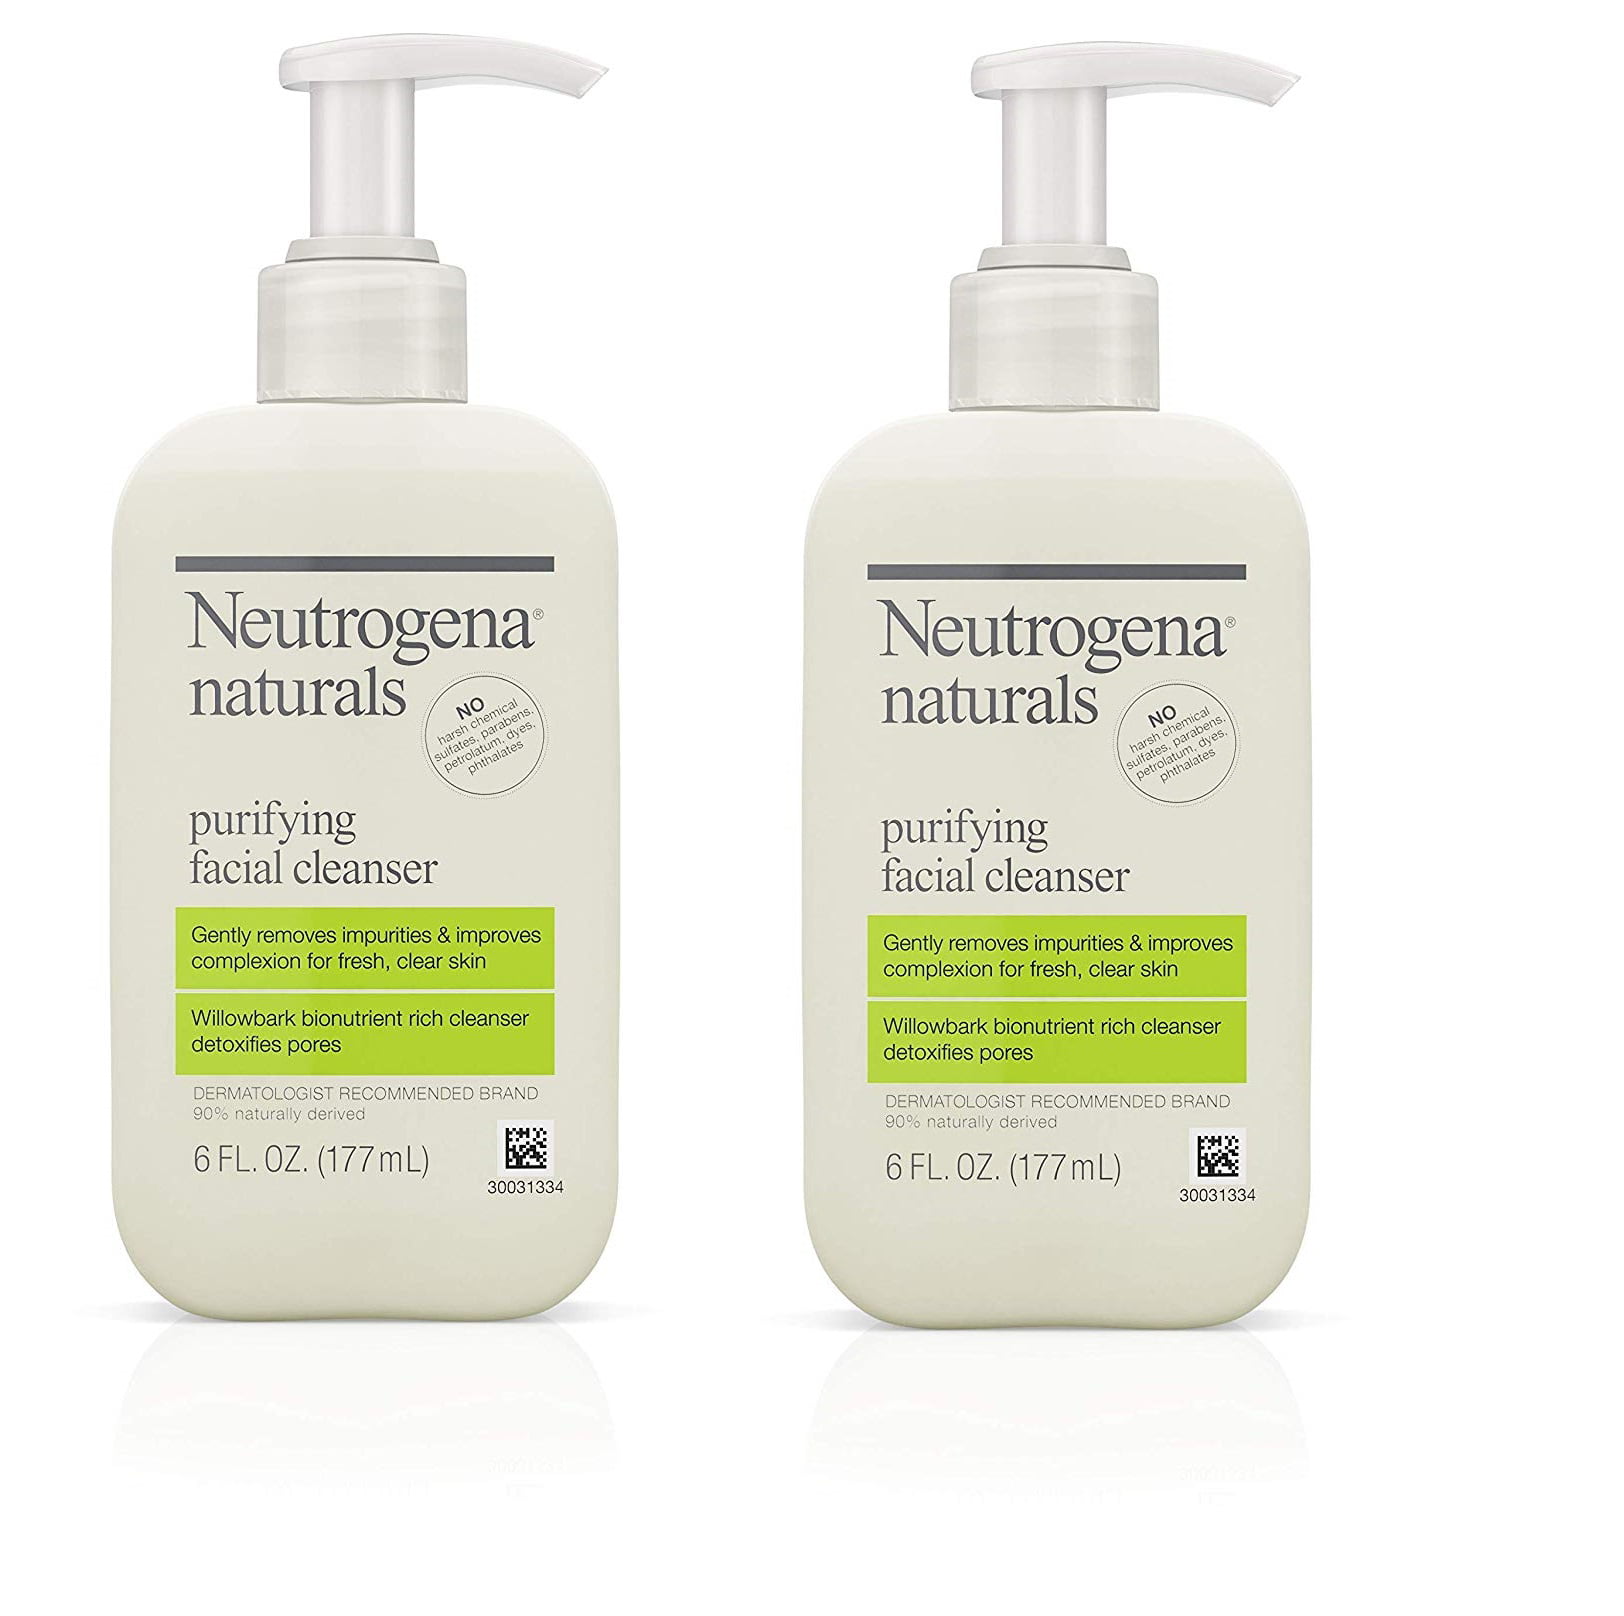 Neutrogena Naturals Purifying Daily Cleanser with Natural Salicylic Acid from Willowbark Bionutrients, Hypoallergenic, Non-Comedogenic & Sulfate-, Paraben- & Phthalate-Free, 6 fl. Oz - Walmart.com